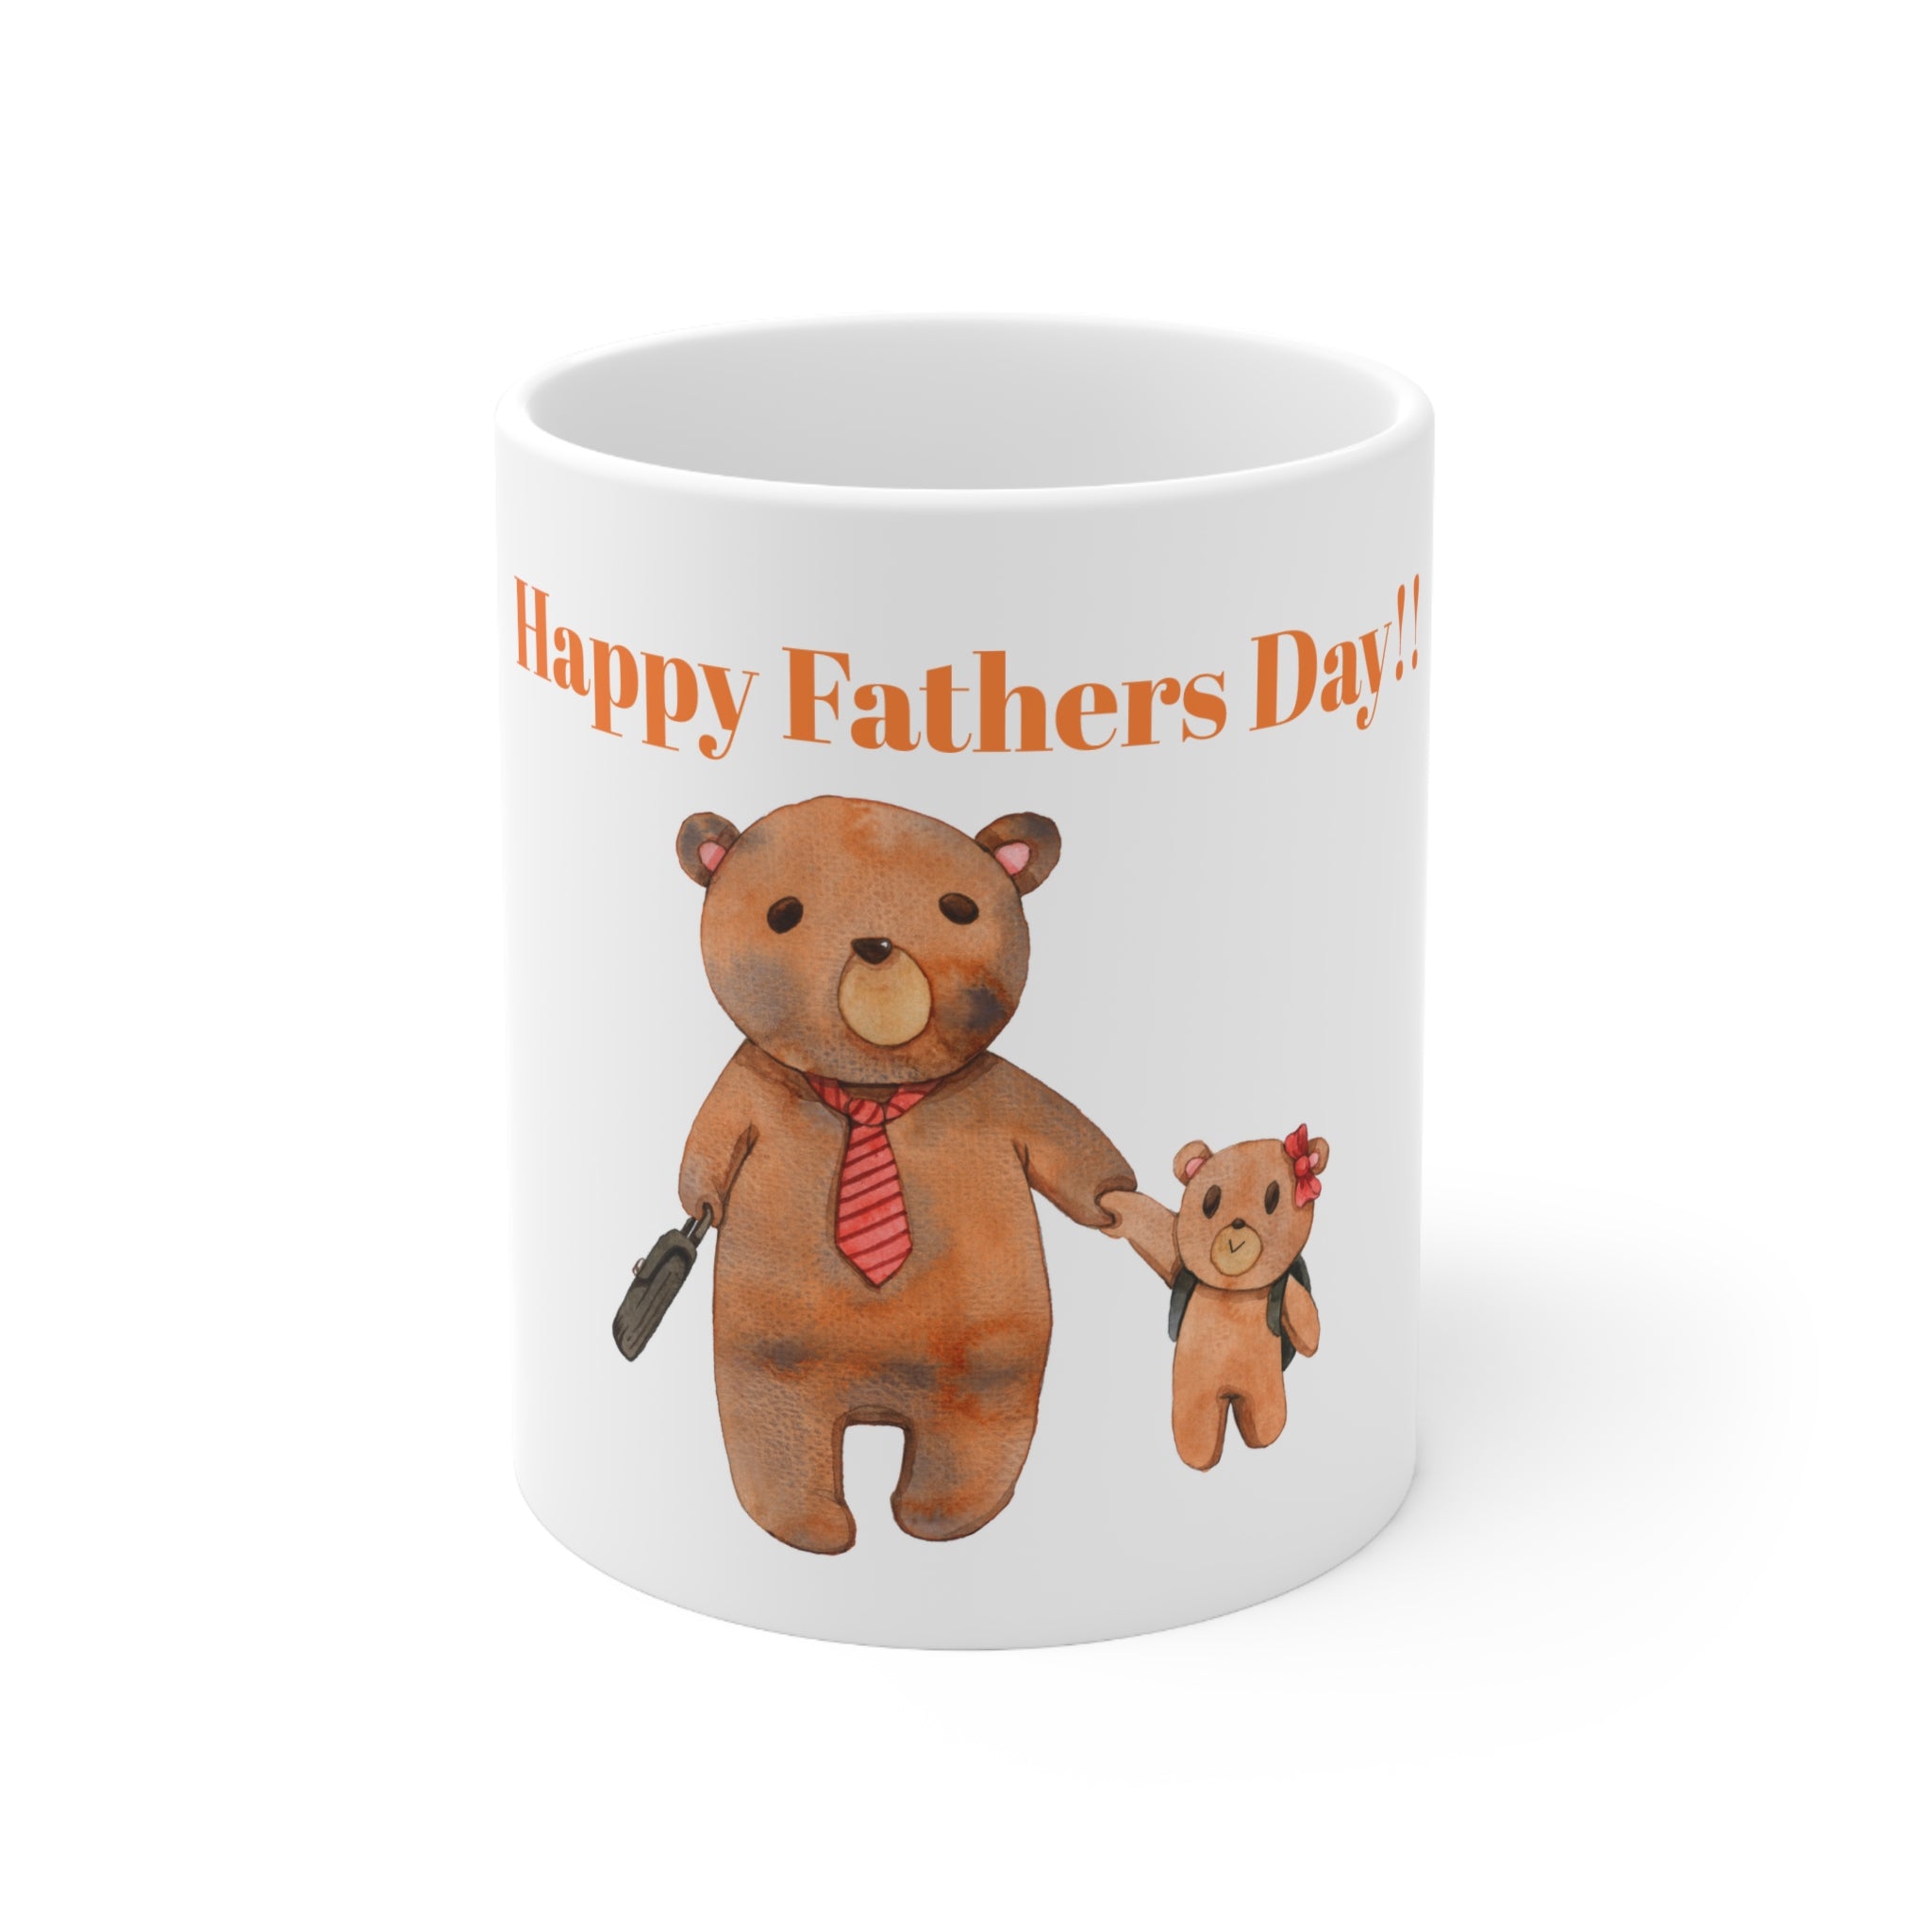 Ceramic Mug 11oz - Happy Fathers Day!! - Featuring Heartwarming Bear and Cub Design - Perfect Gift for Celebrating Fatherhood"